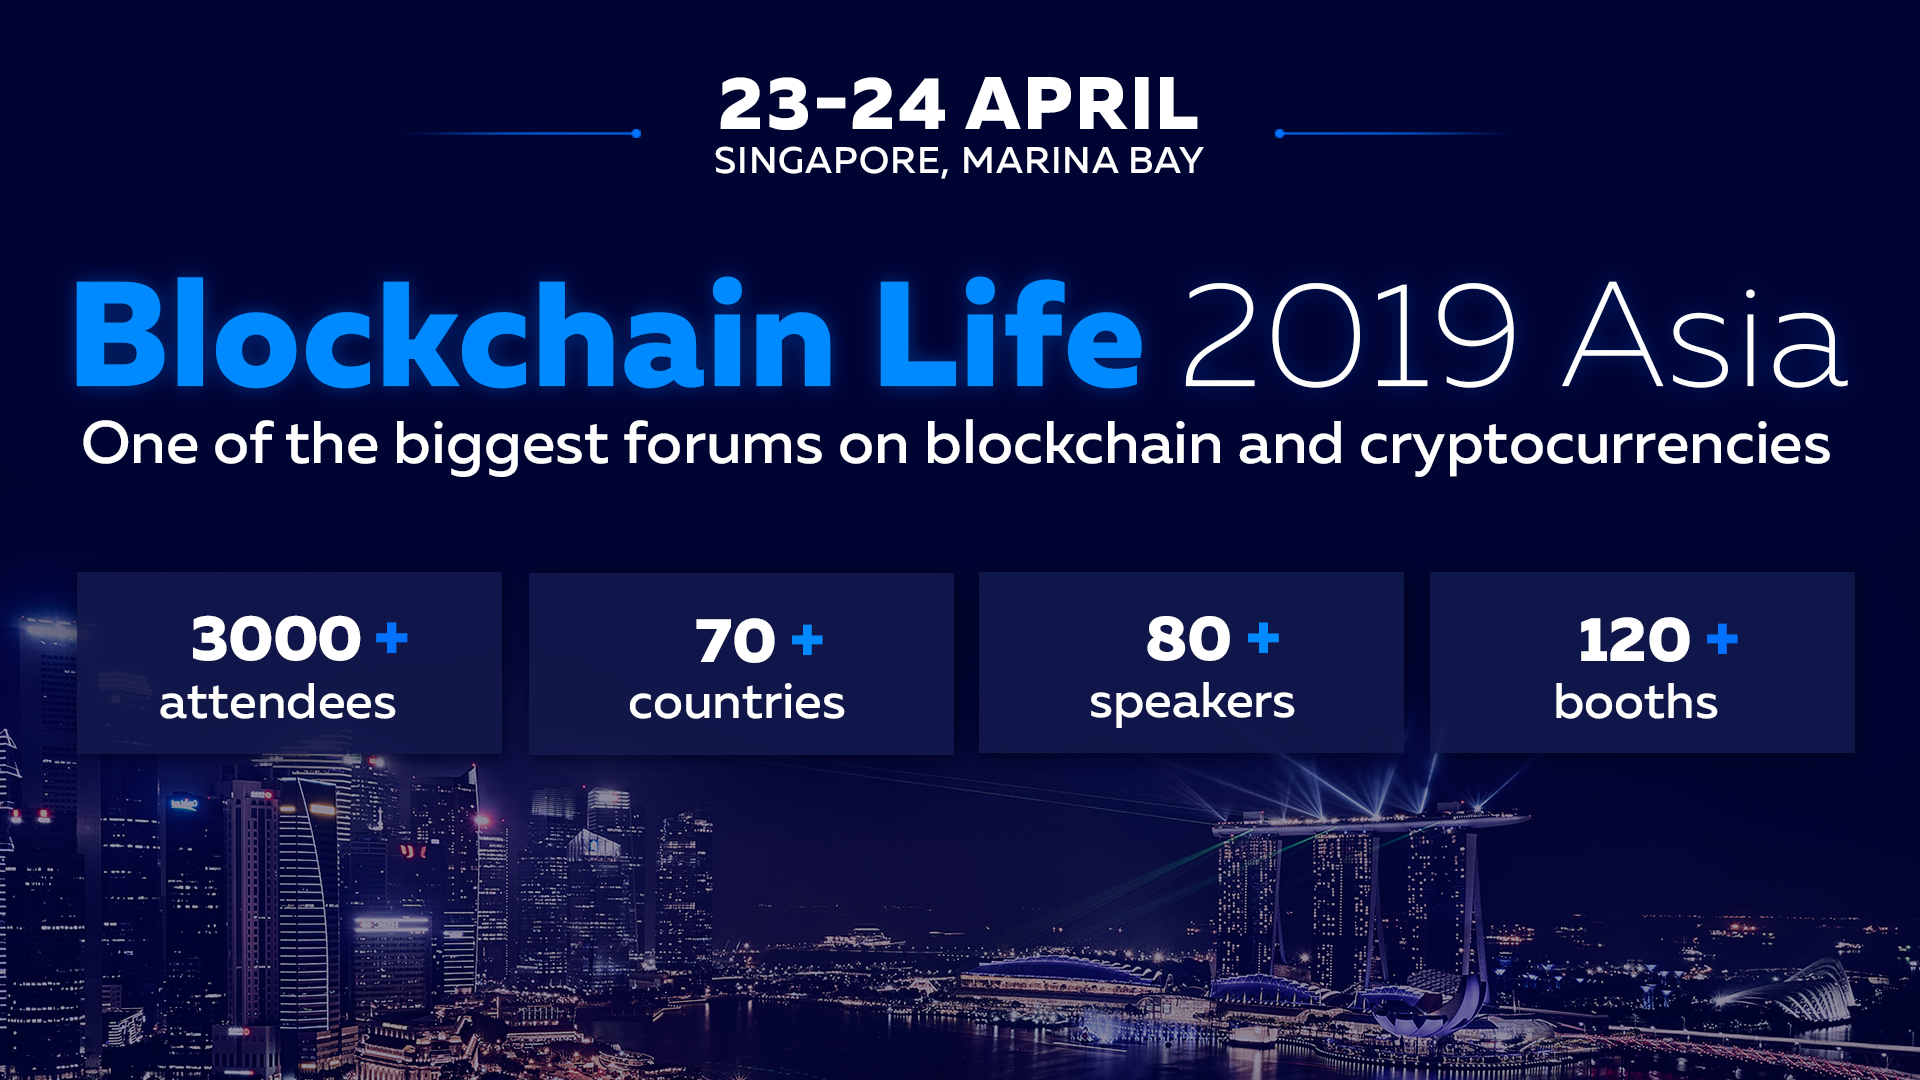 23-24 April Singapore hosts Blockchain Life 2019 – a global forum on blockchain and cryptocurrencies